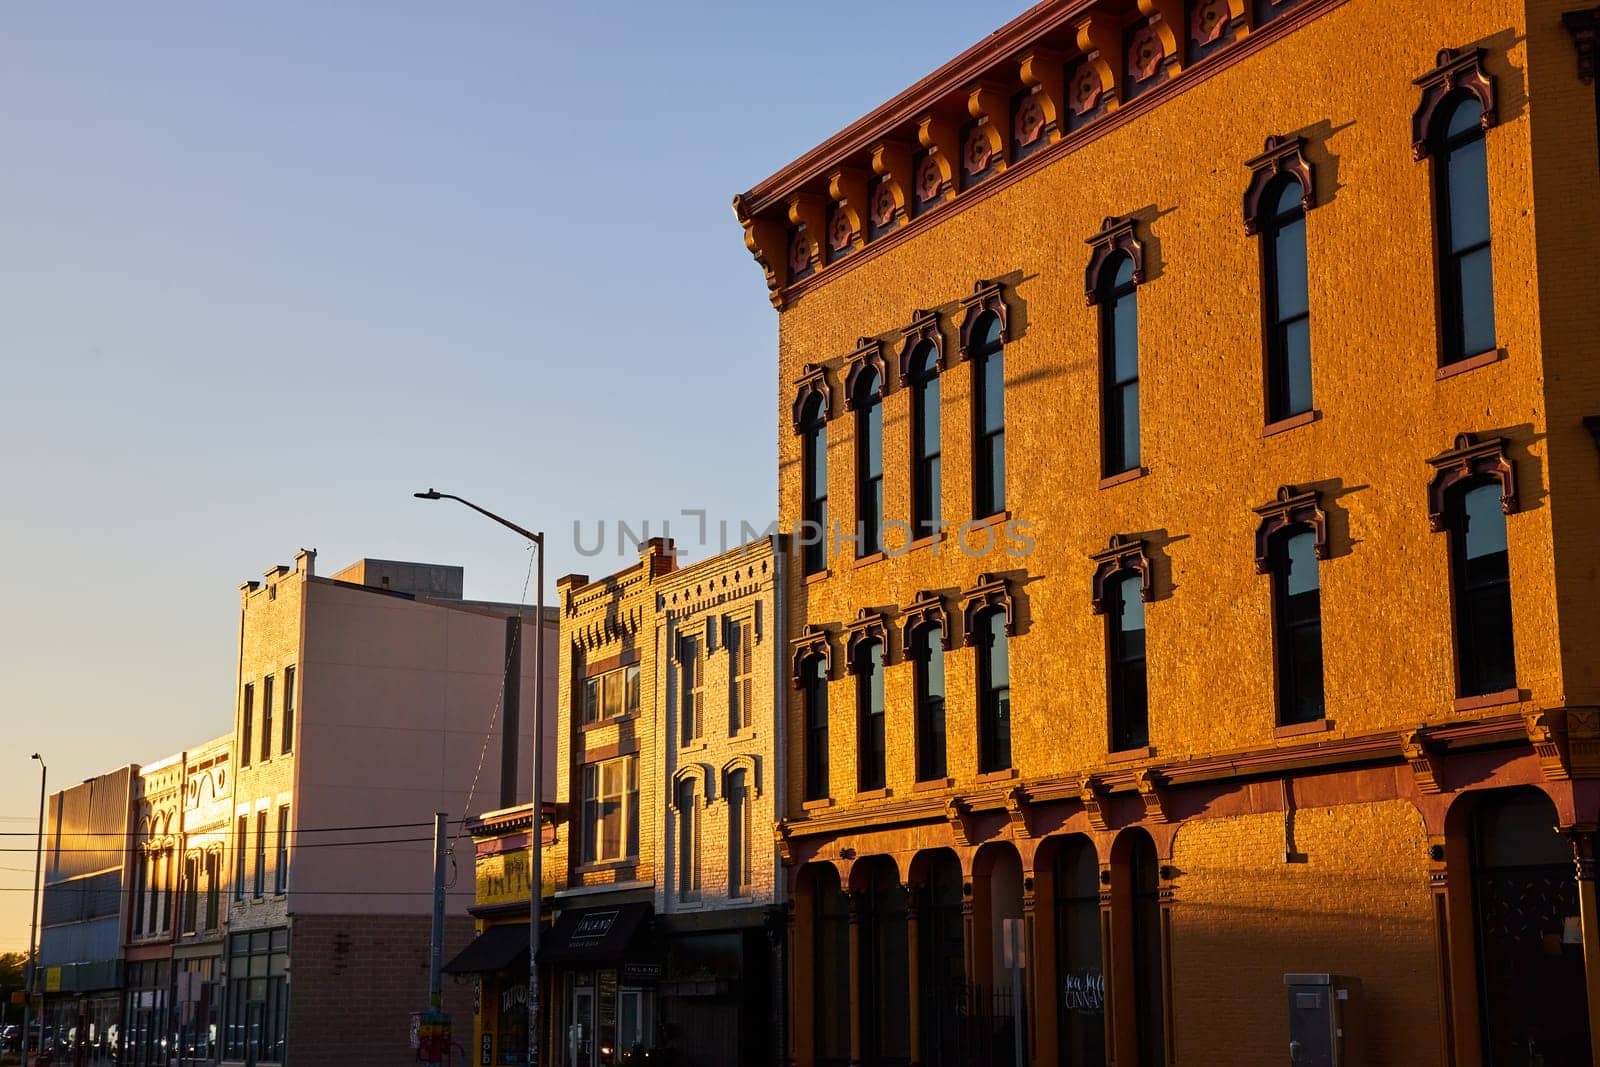 Historic buildings of Muncie, Indiana, illuminated by the golden sunrise light, showcasing their early 20th-century architecture and charm.